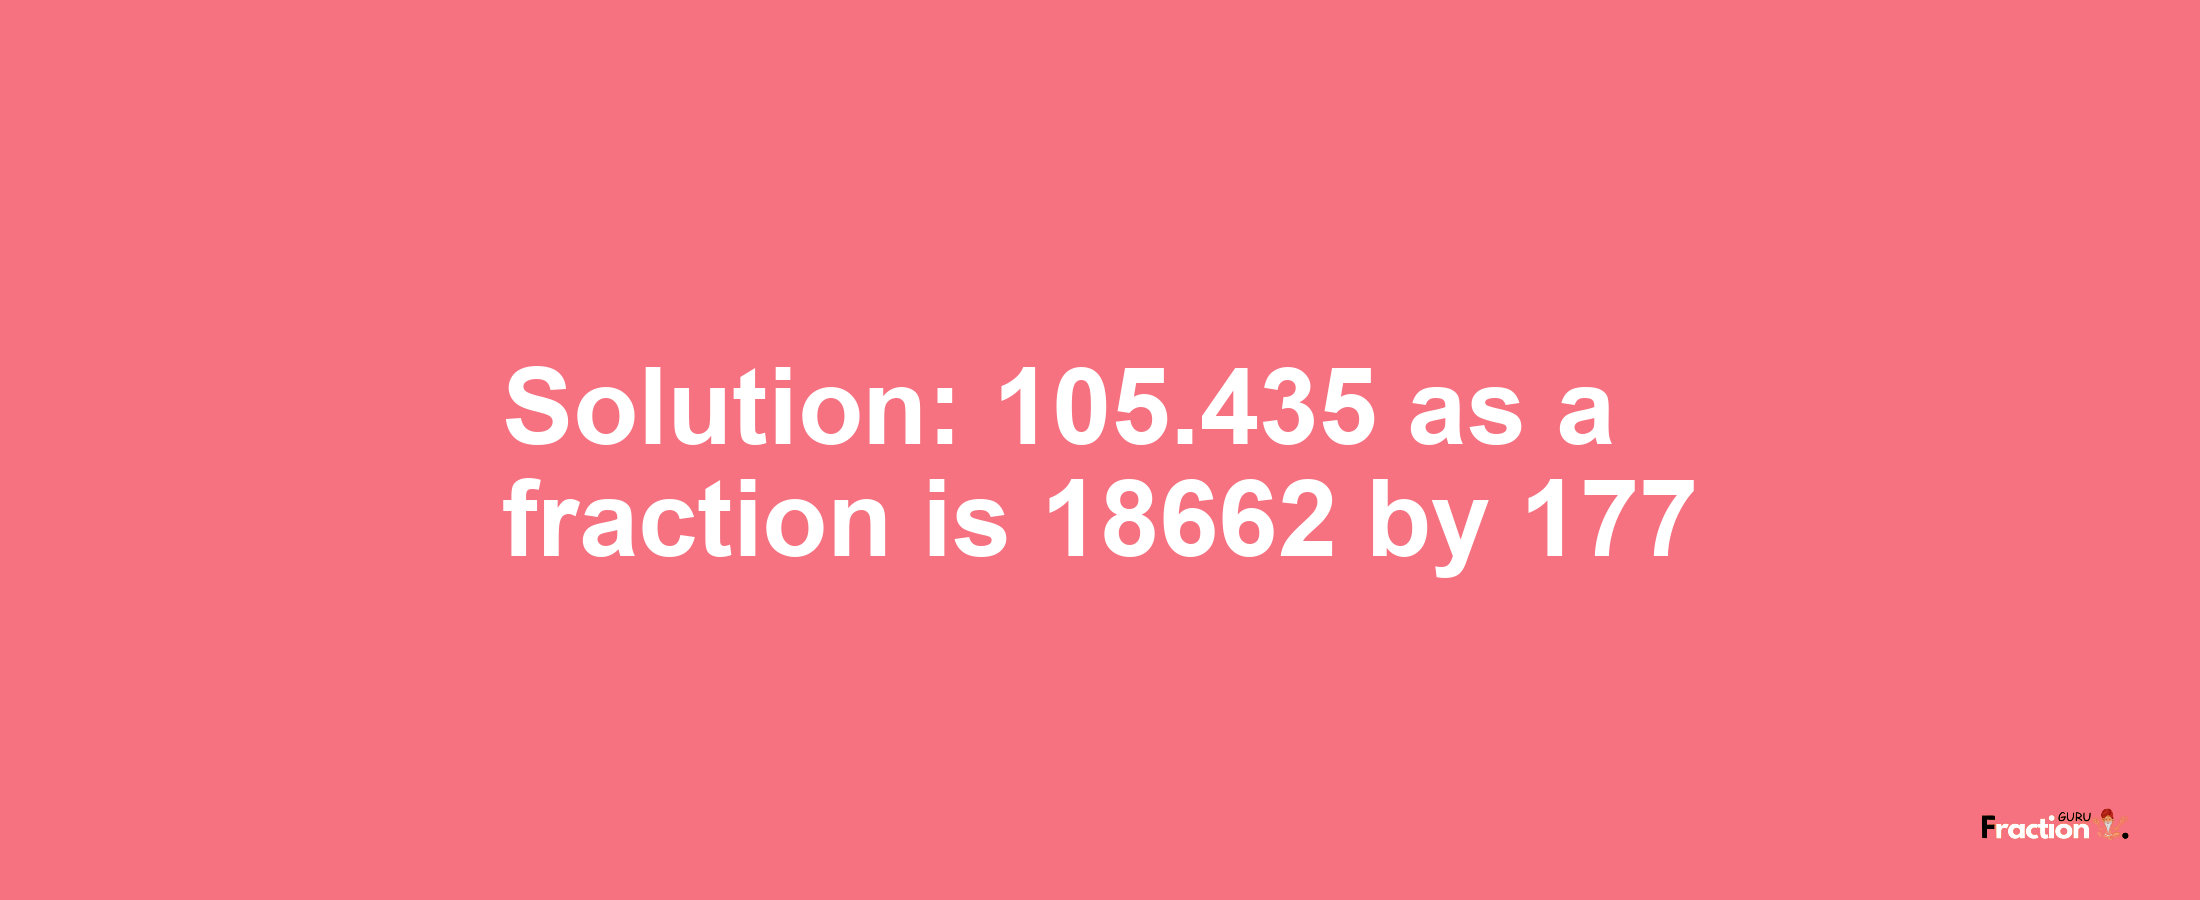 Solution:105.435 as a fraction is 18662/177